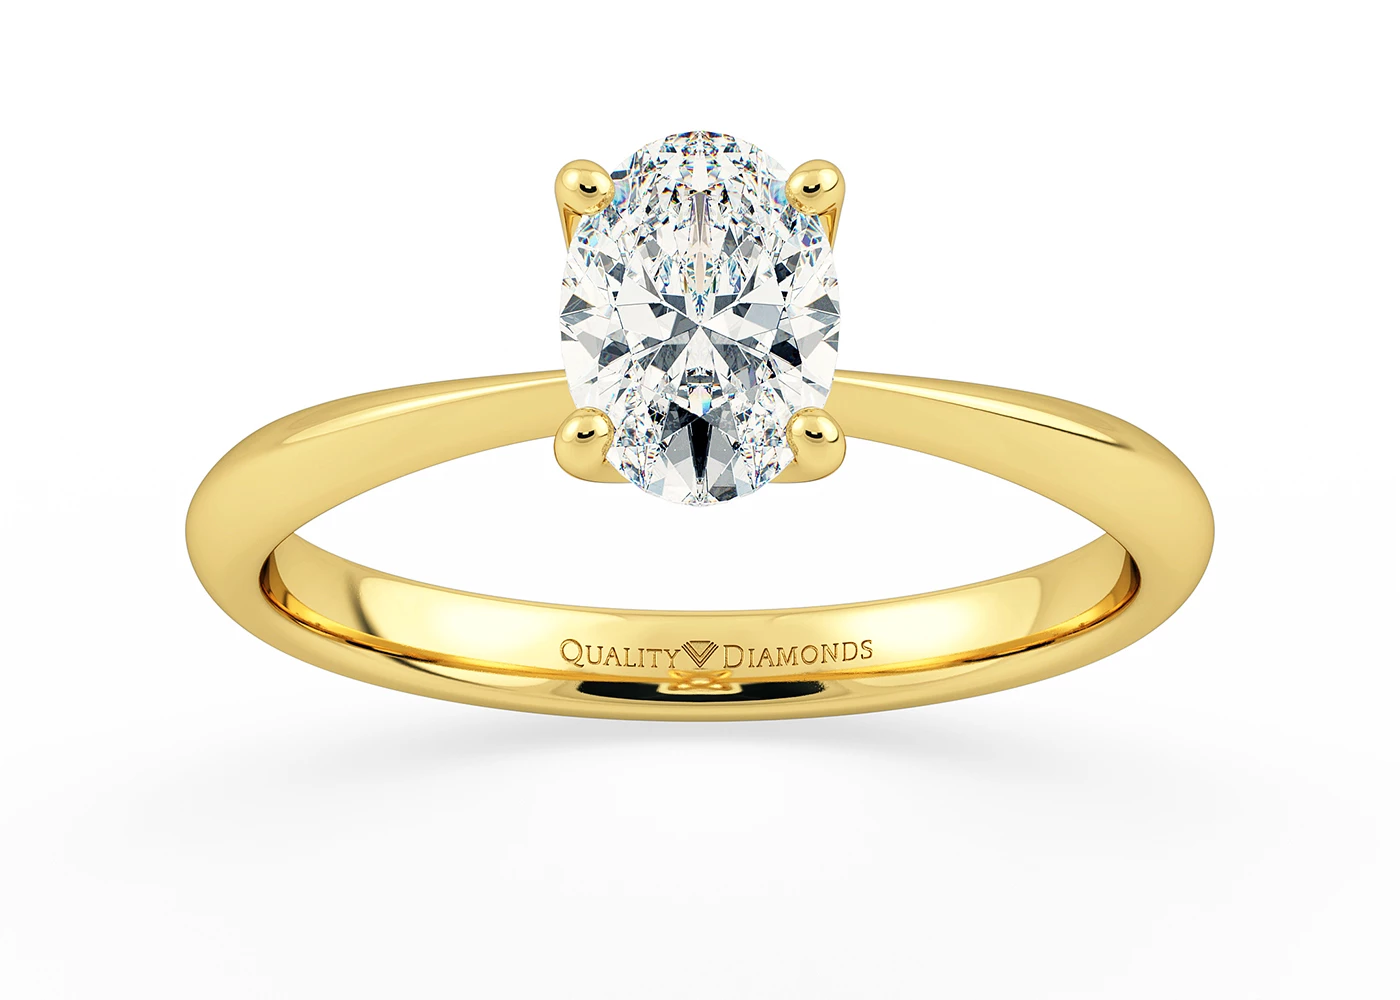 Oval Amorette Diamond Ring in 18K Yellow Gold